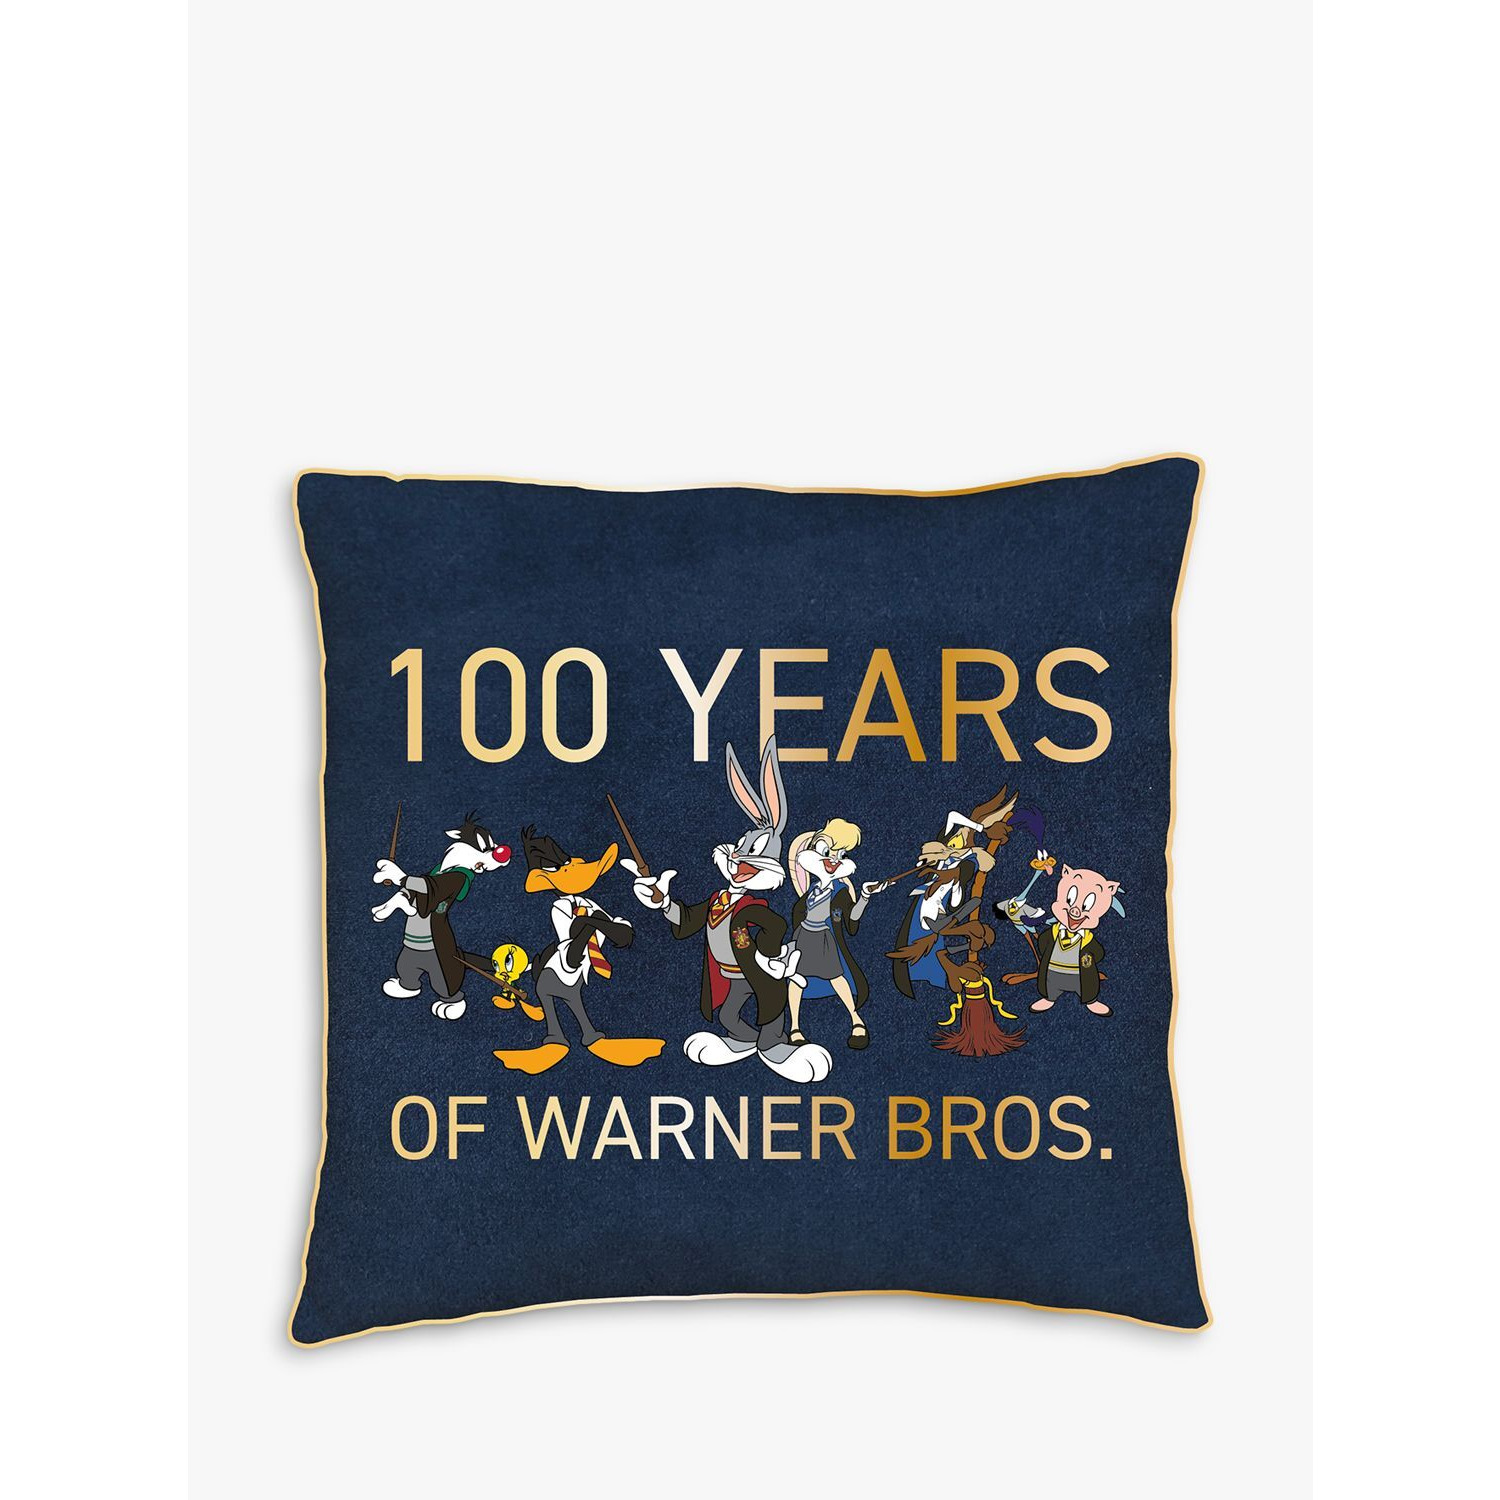 Harry Potter Warner Bros Mash Up Limited Edition 100th Anniversary Square Cushion - image 1